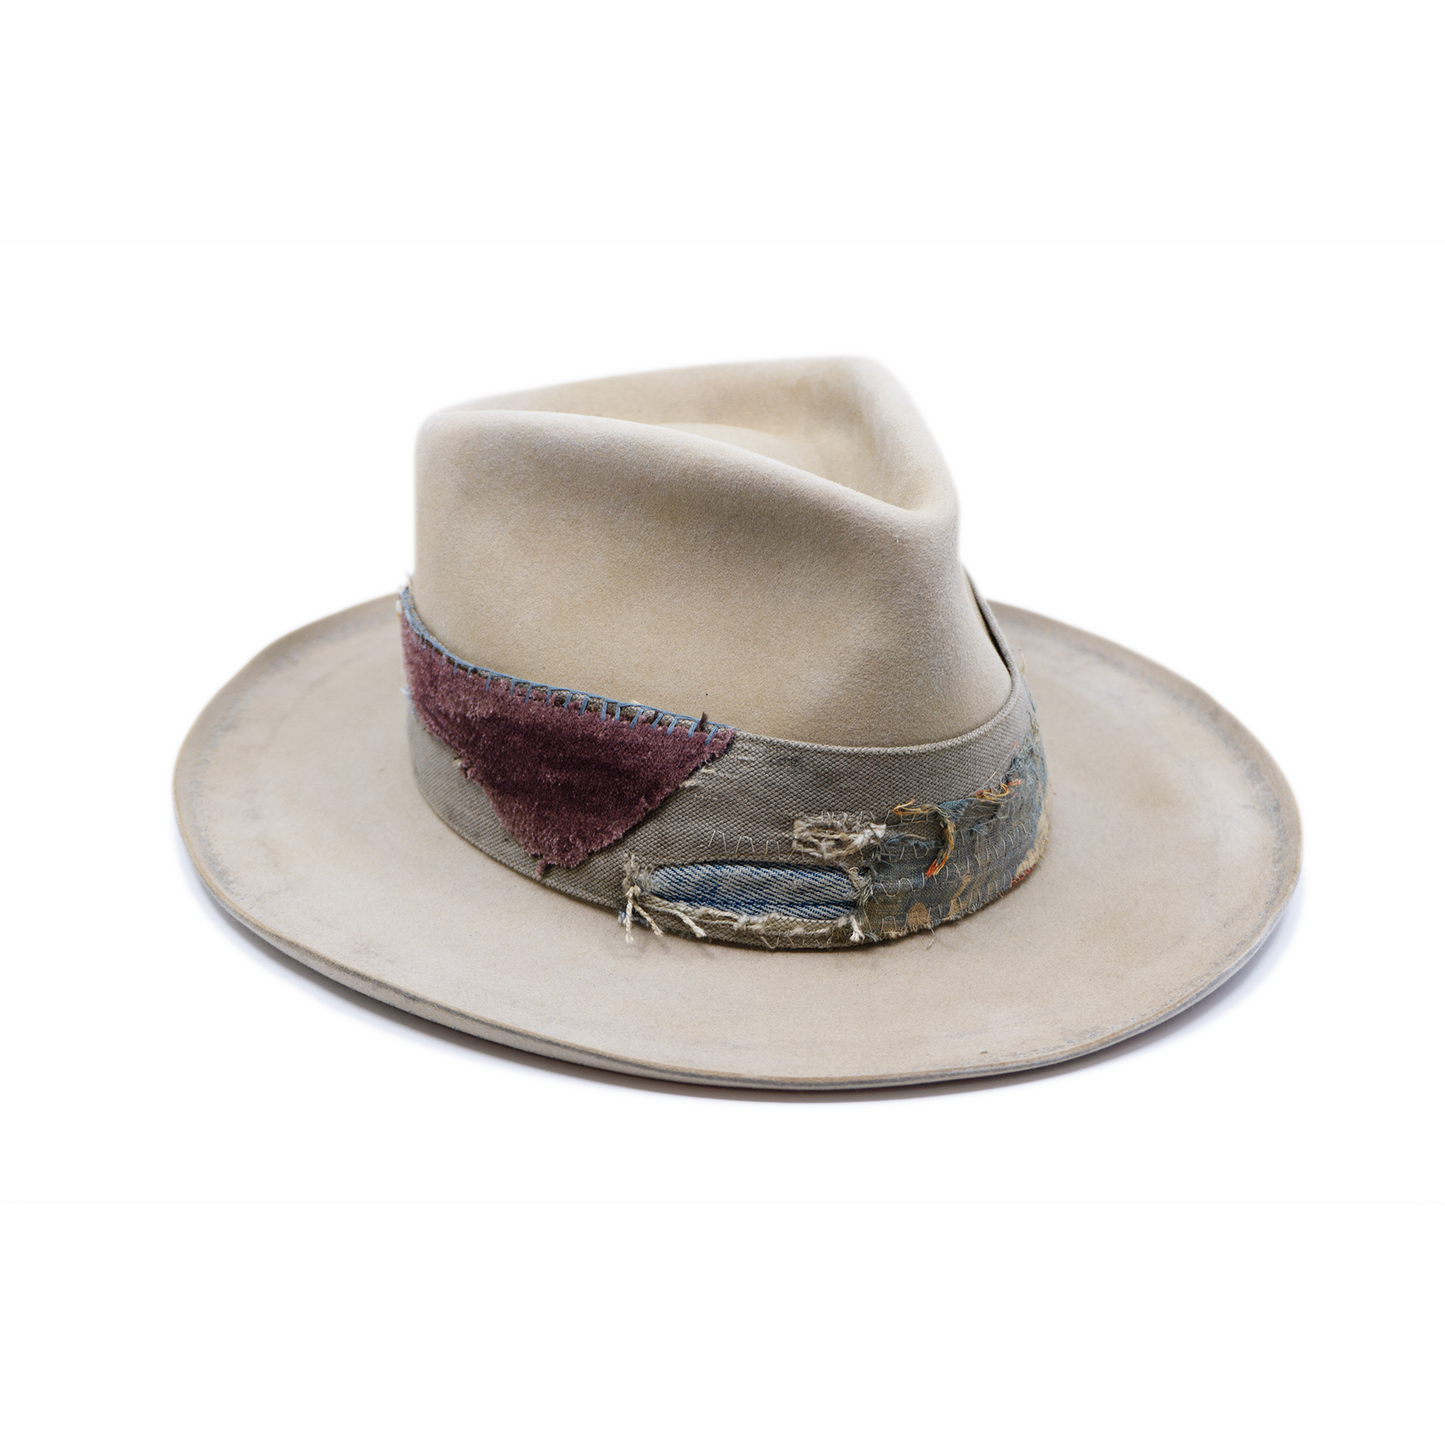 100% felt hat in Silver Belly   Western Weight  Coffee dye   2” multi fabric band   Velvet with tonal grosgrain center bow   Light blue zig zag stitching on brim   Pencil curled brim  Made in USA